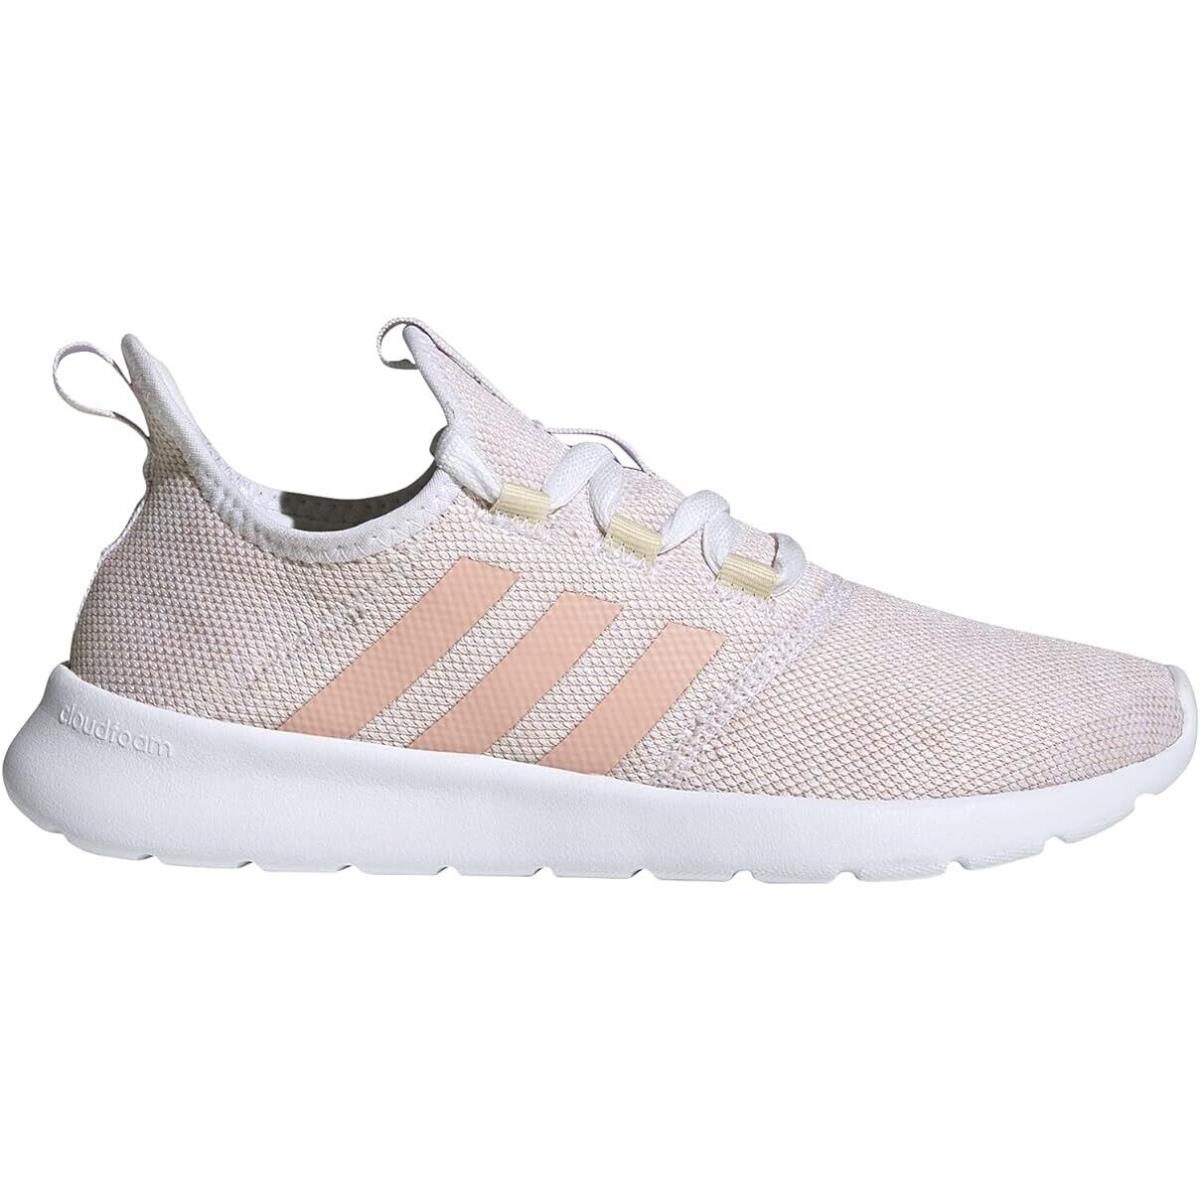 Adidas Womens Cloudfoam Pure 2.0 Running Shoes Wonder White Vapour Pink Size 10